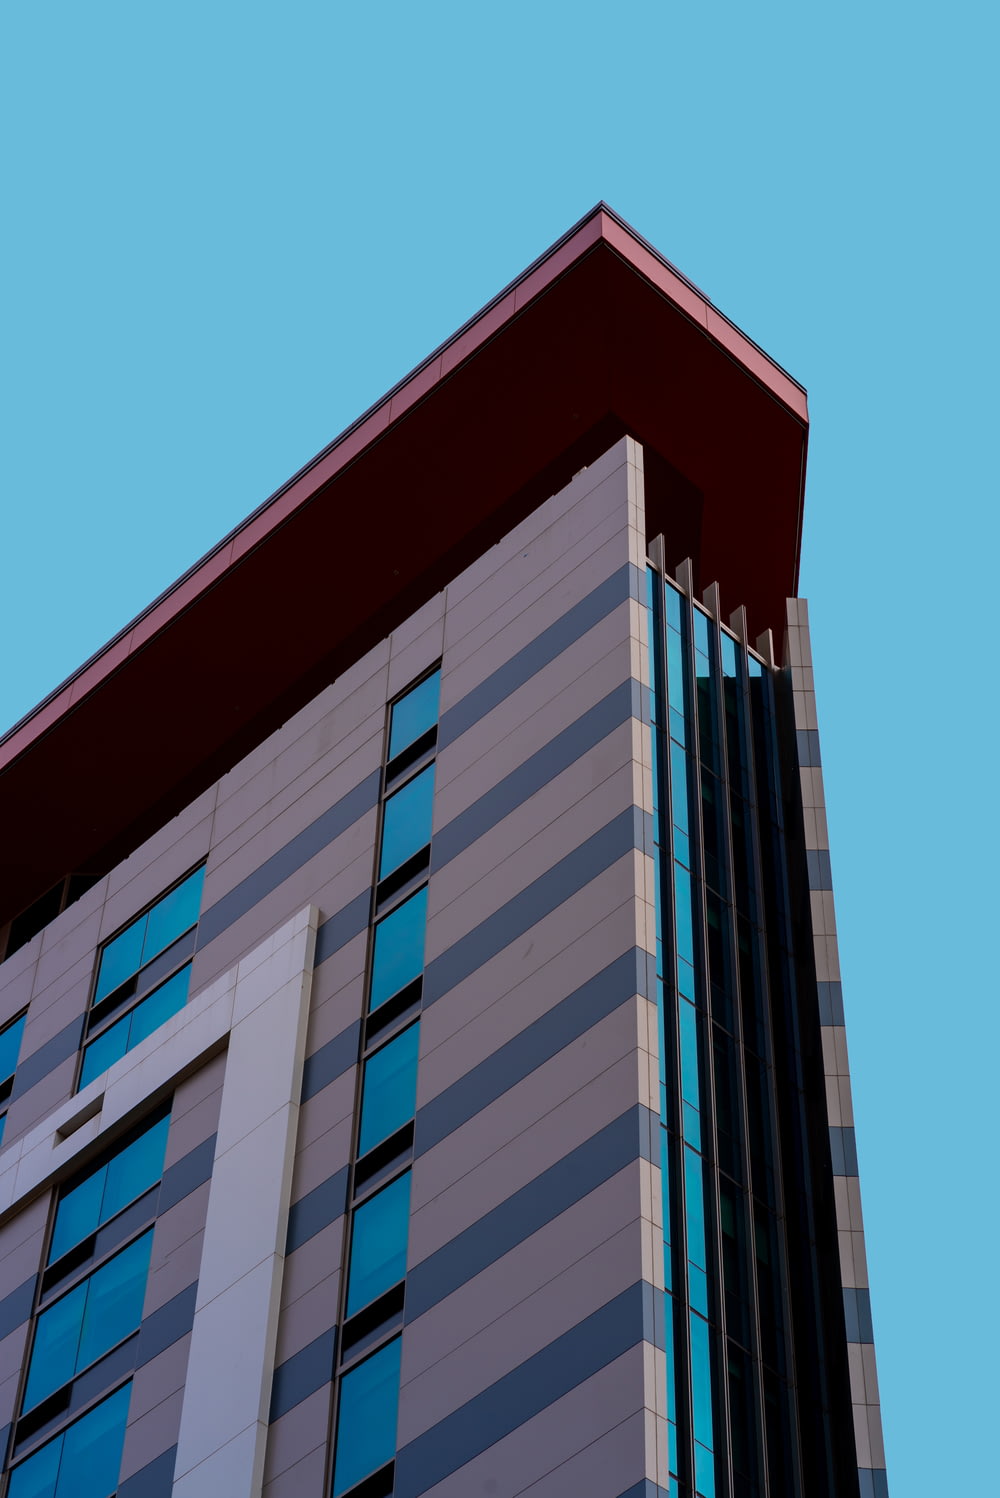 high rise building